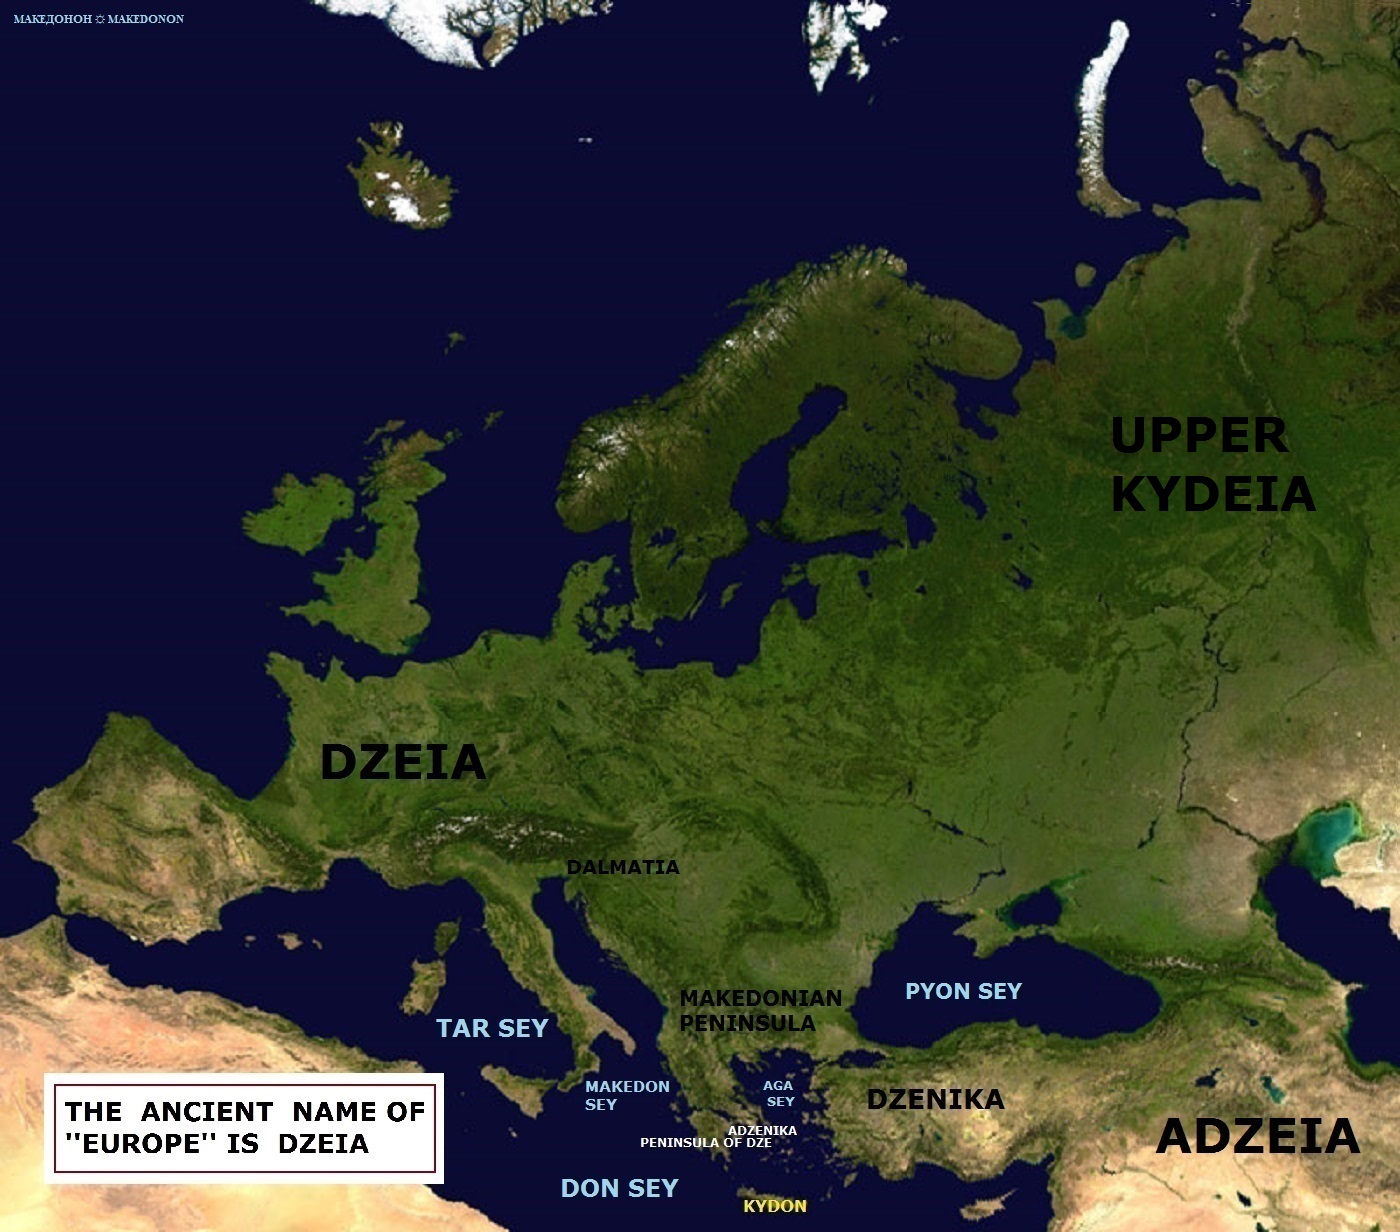 The ancient name of europe is Dzeia